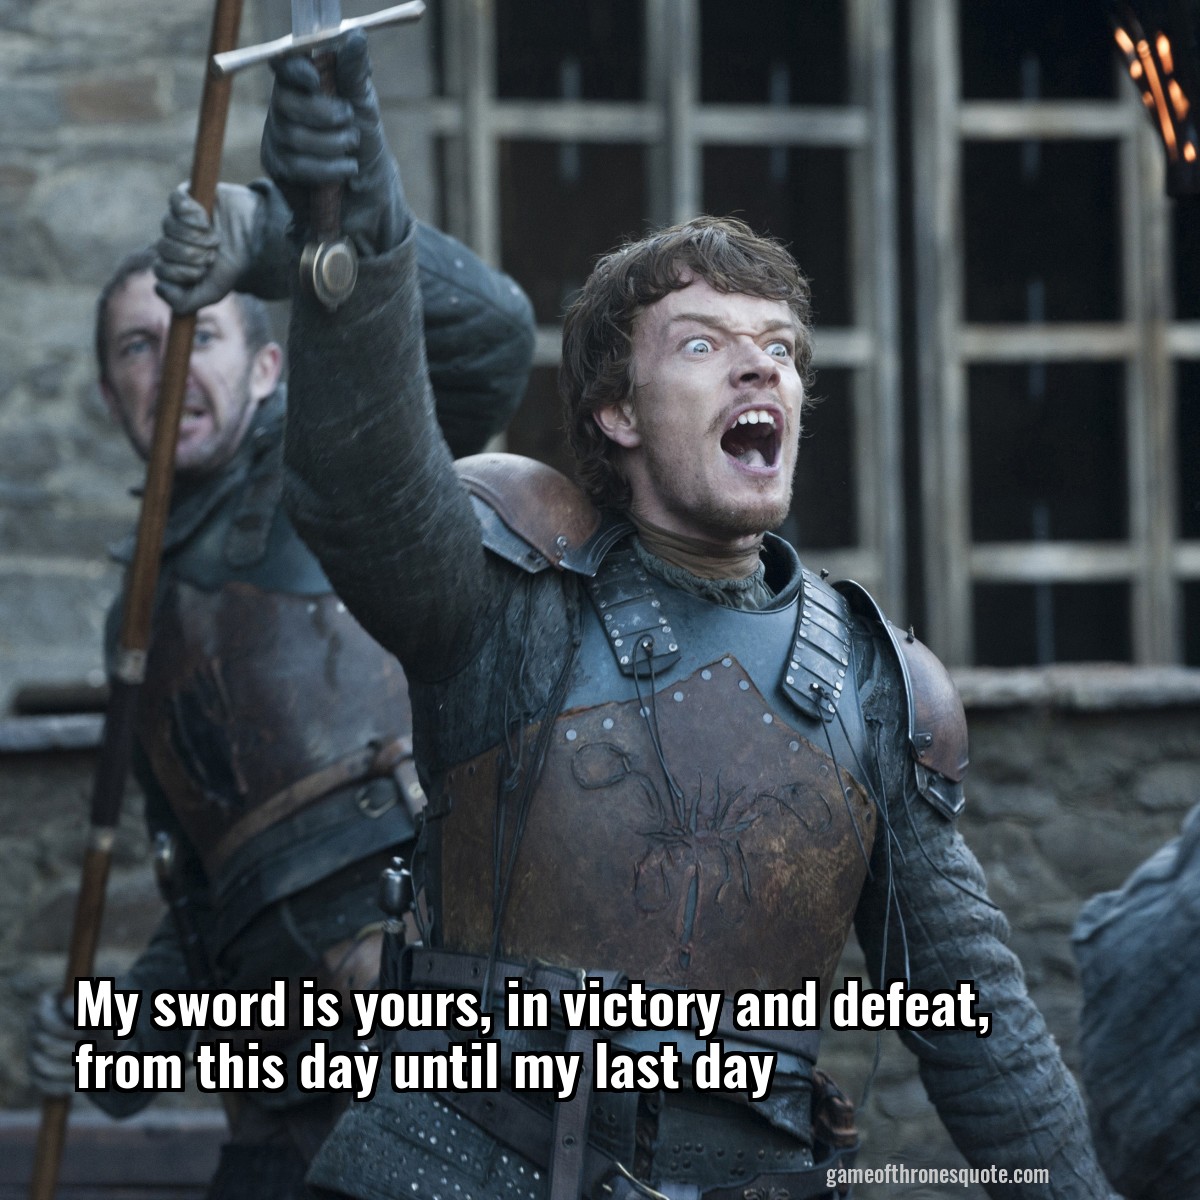 My sword is yours, in victory and defeat, from this day until my last day